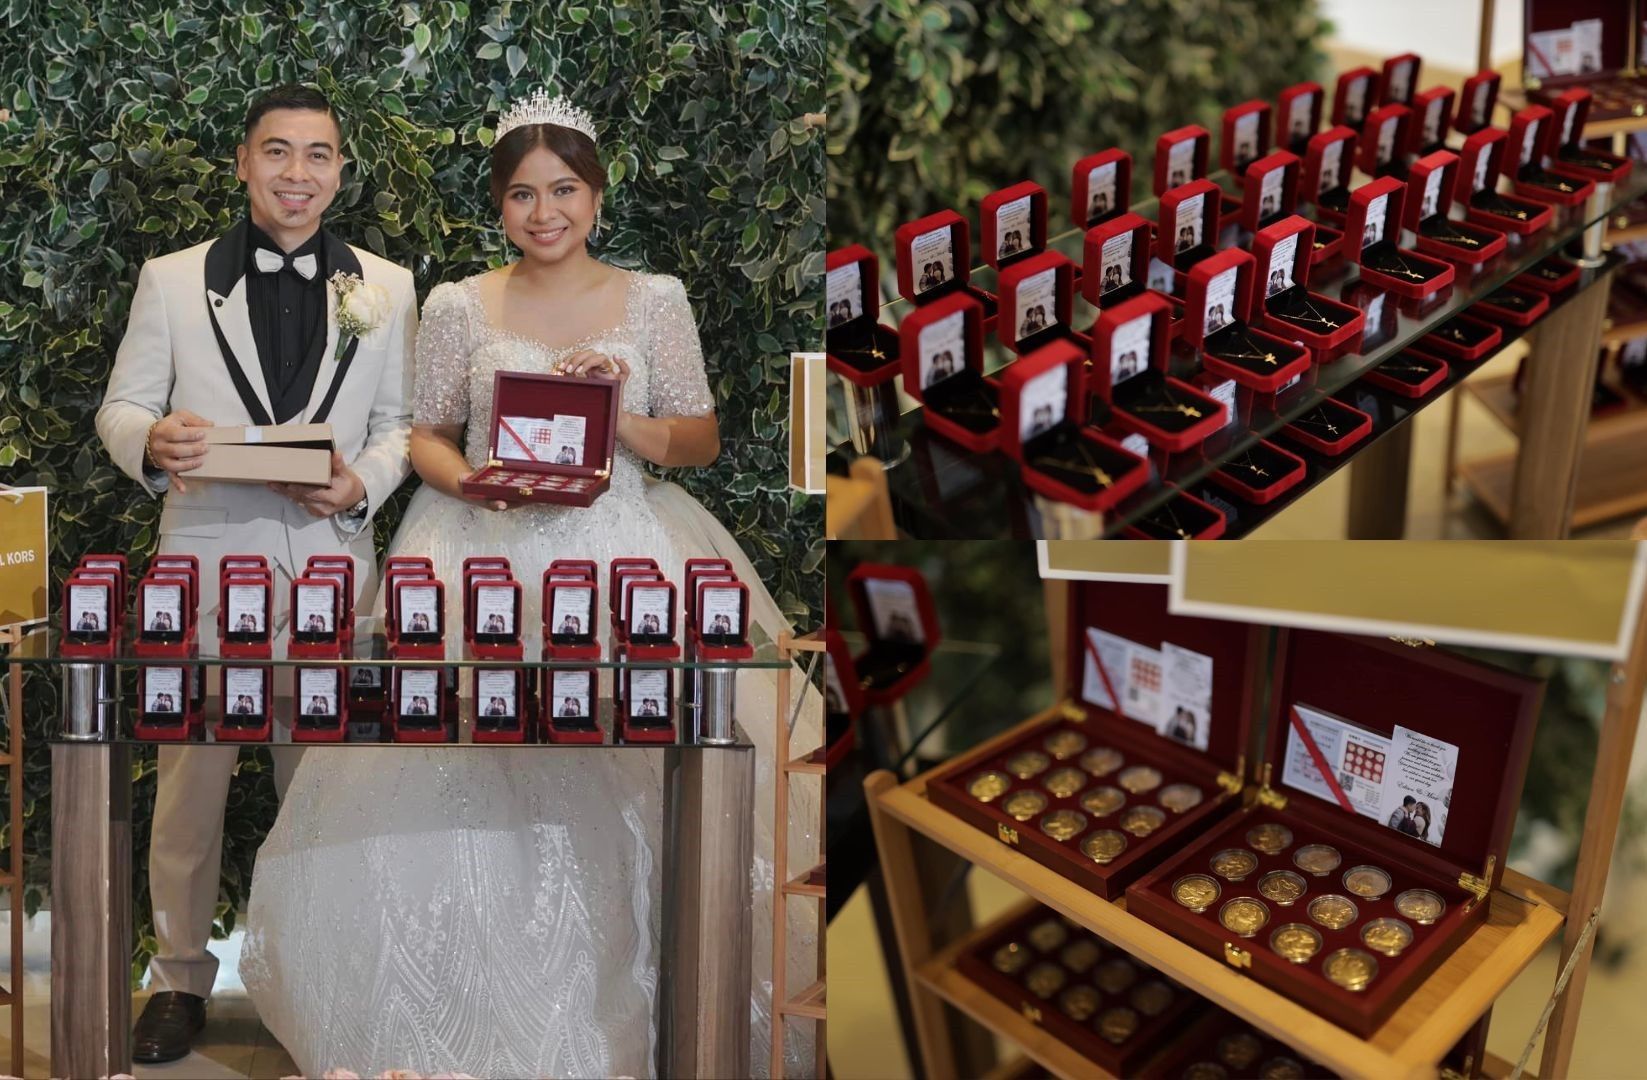 Filipino couple goes viral for Michael Kors watches, 18K gold jewelry wedding giveaways